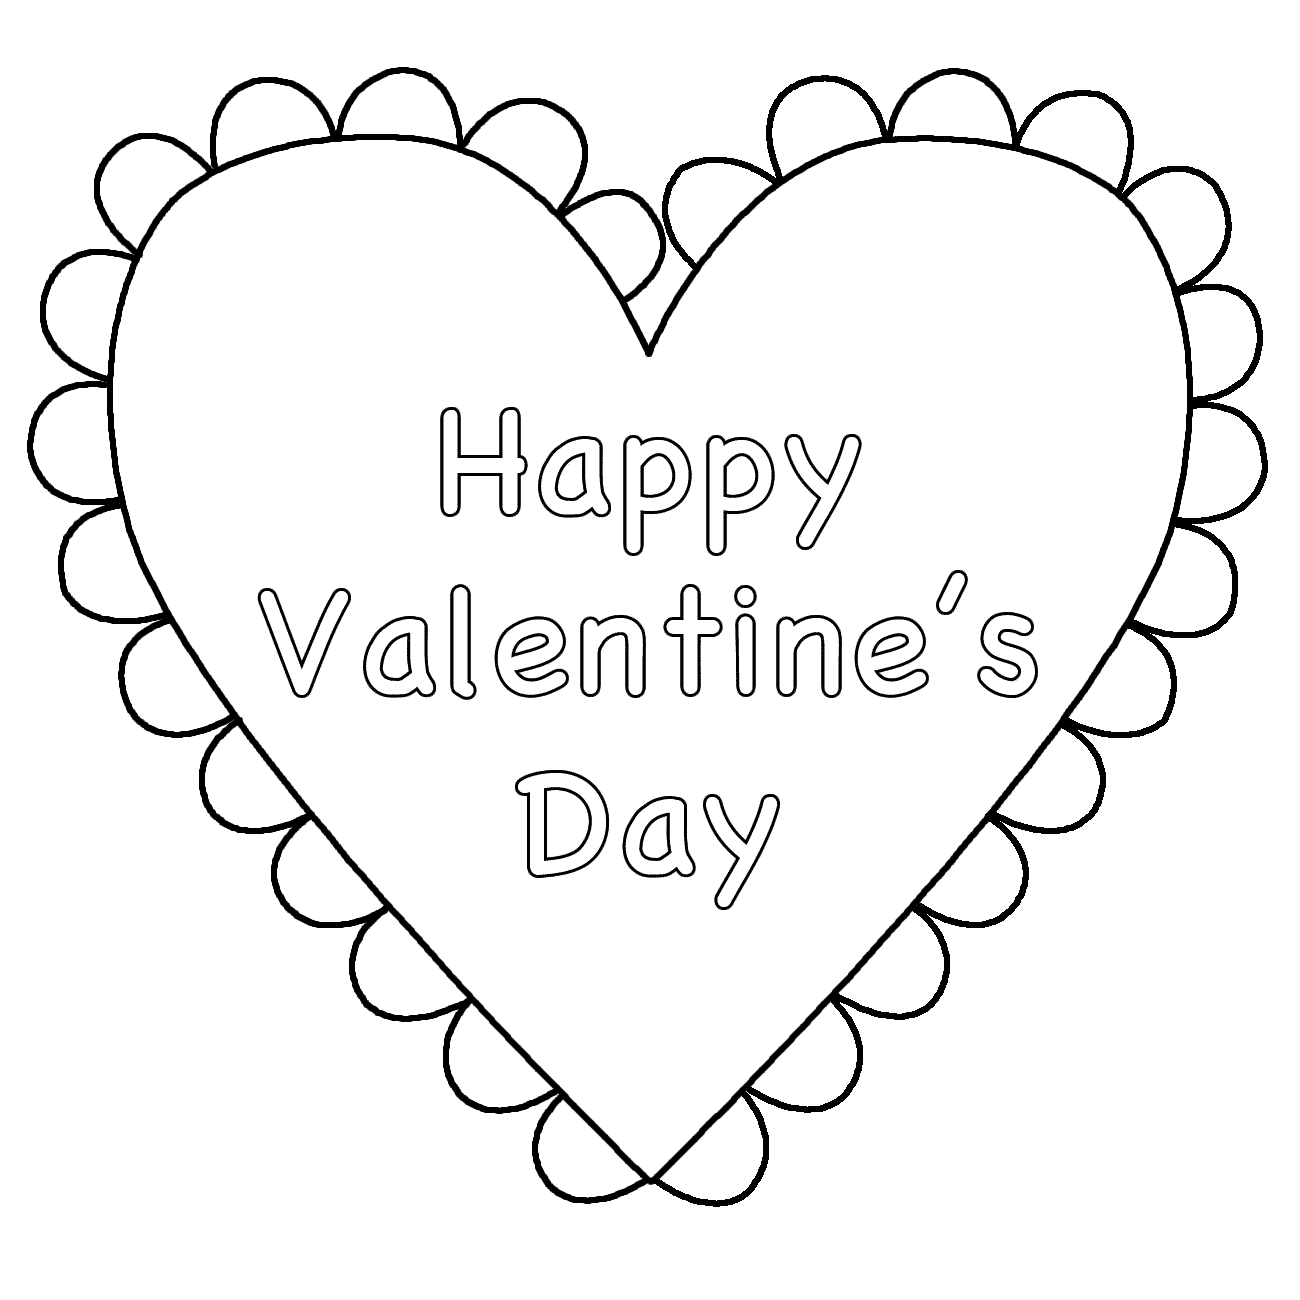 Valentines Day Heart Coloring Page - Coloring Home